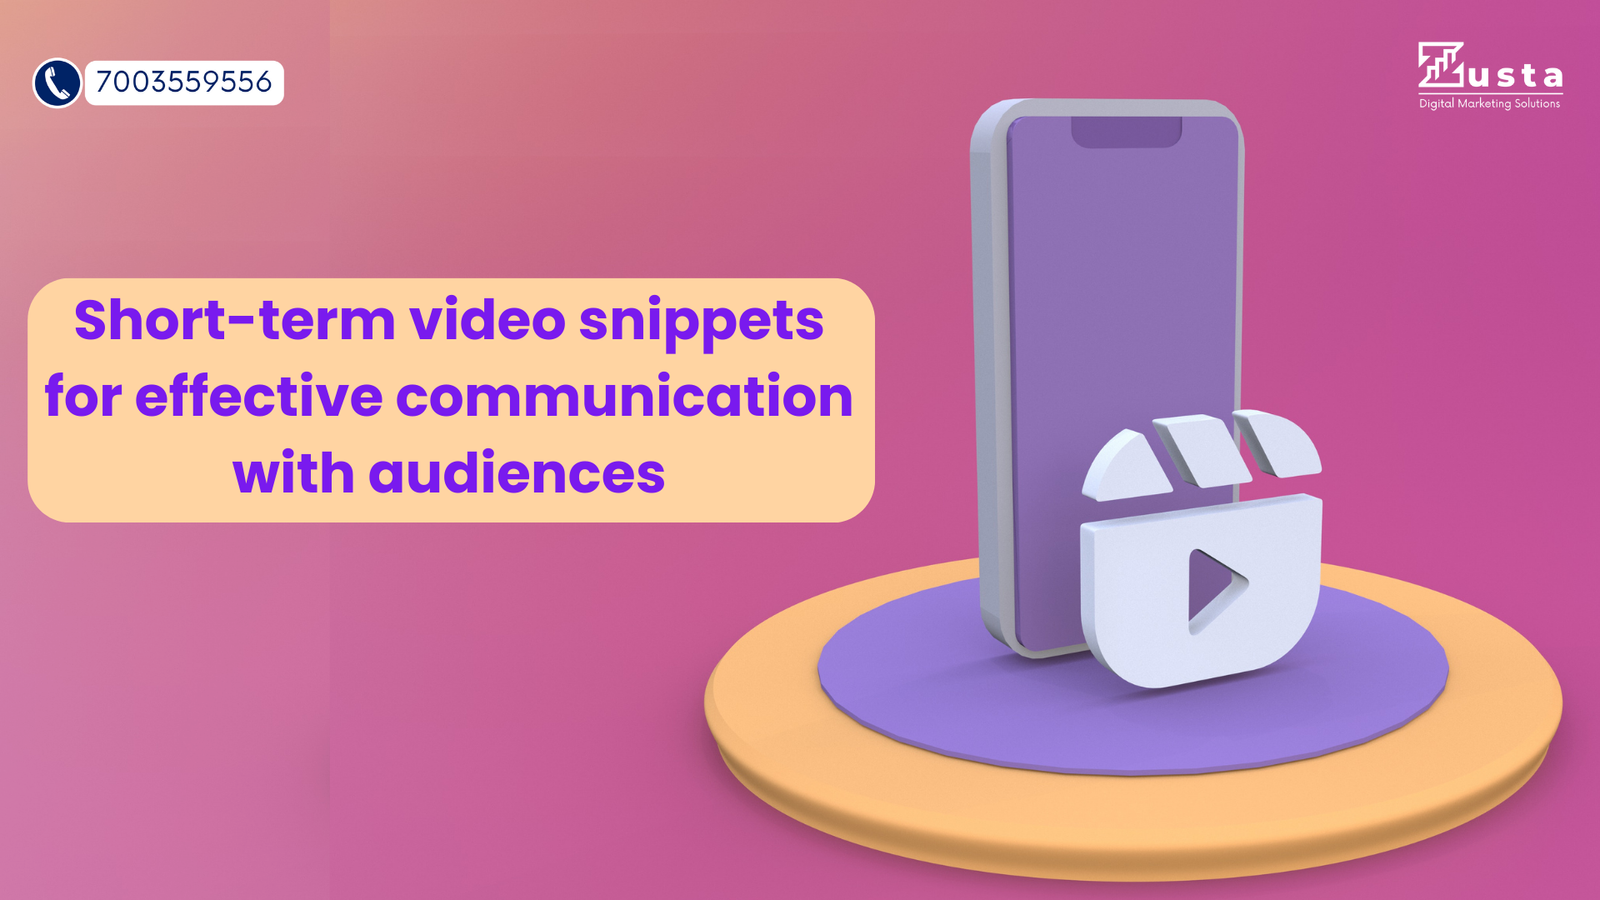 Short-term video snippets for effective communication with audiences